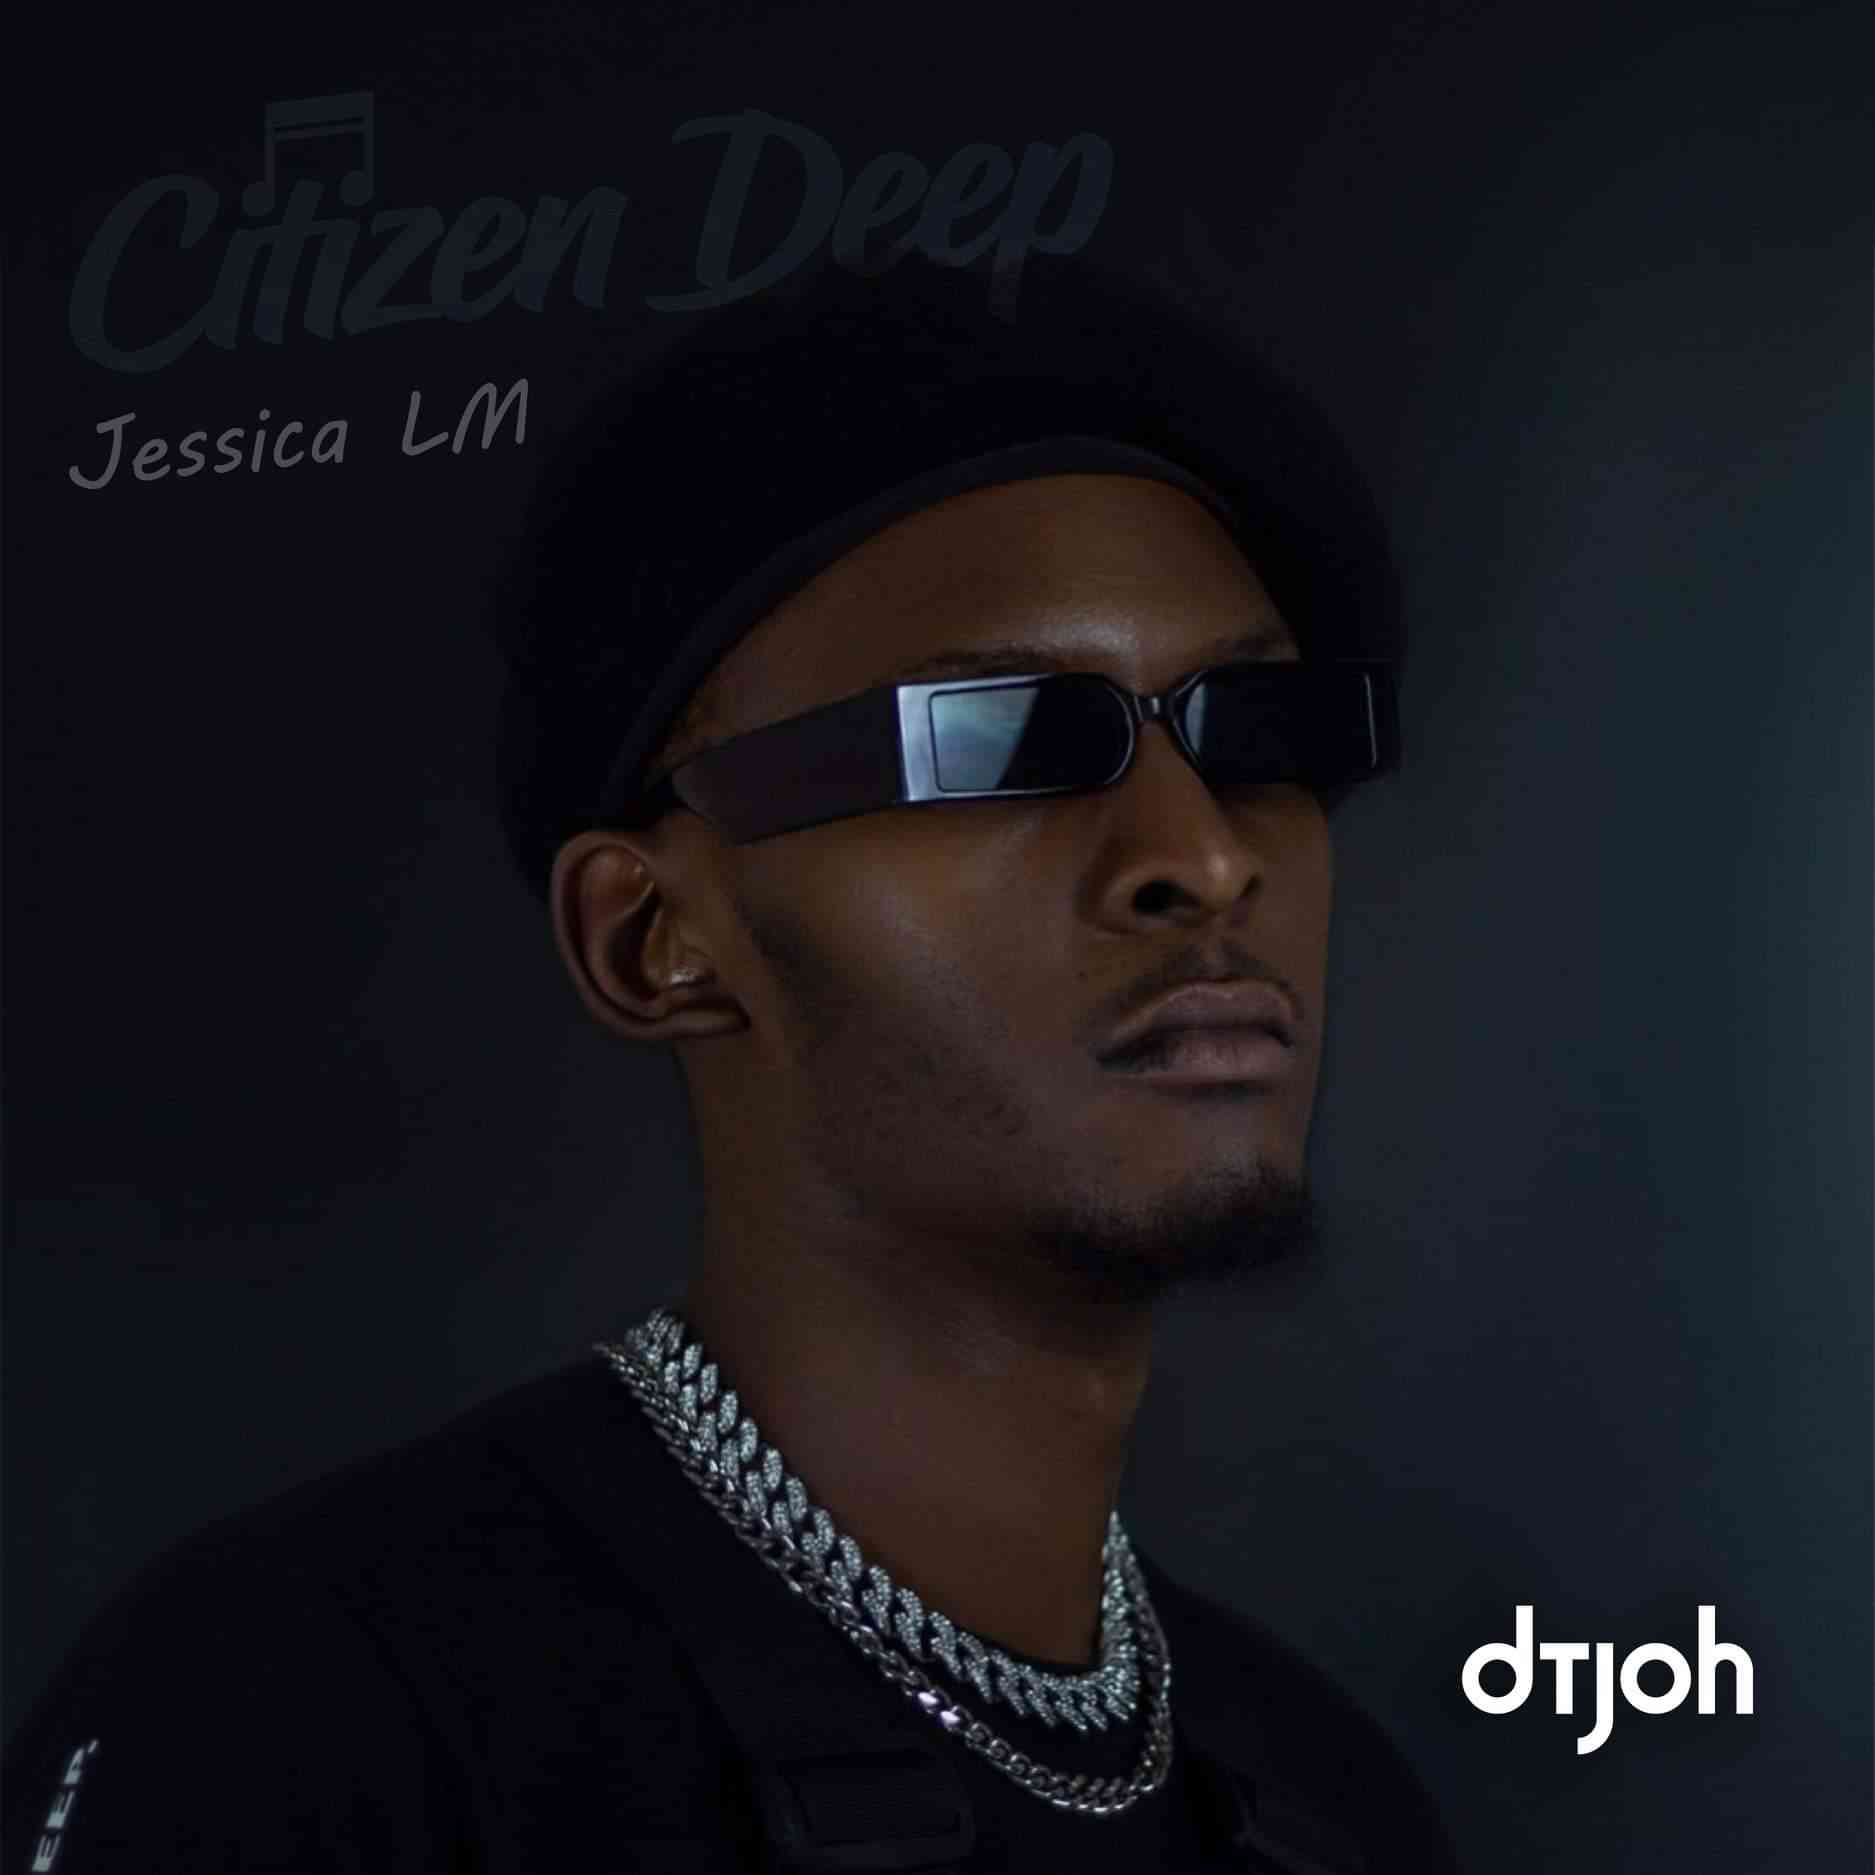 Citizen Deep Takes Us On a Soulful Journey With Dtjoh Featuring Jessica LM